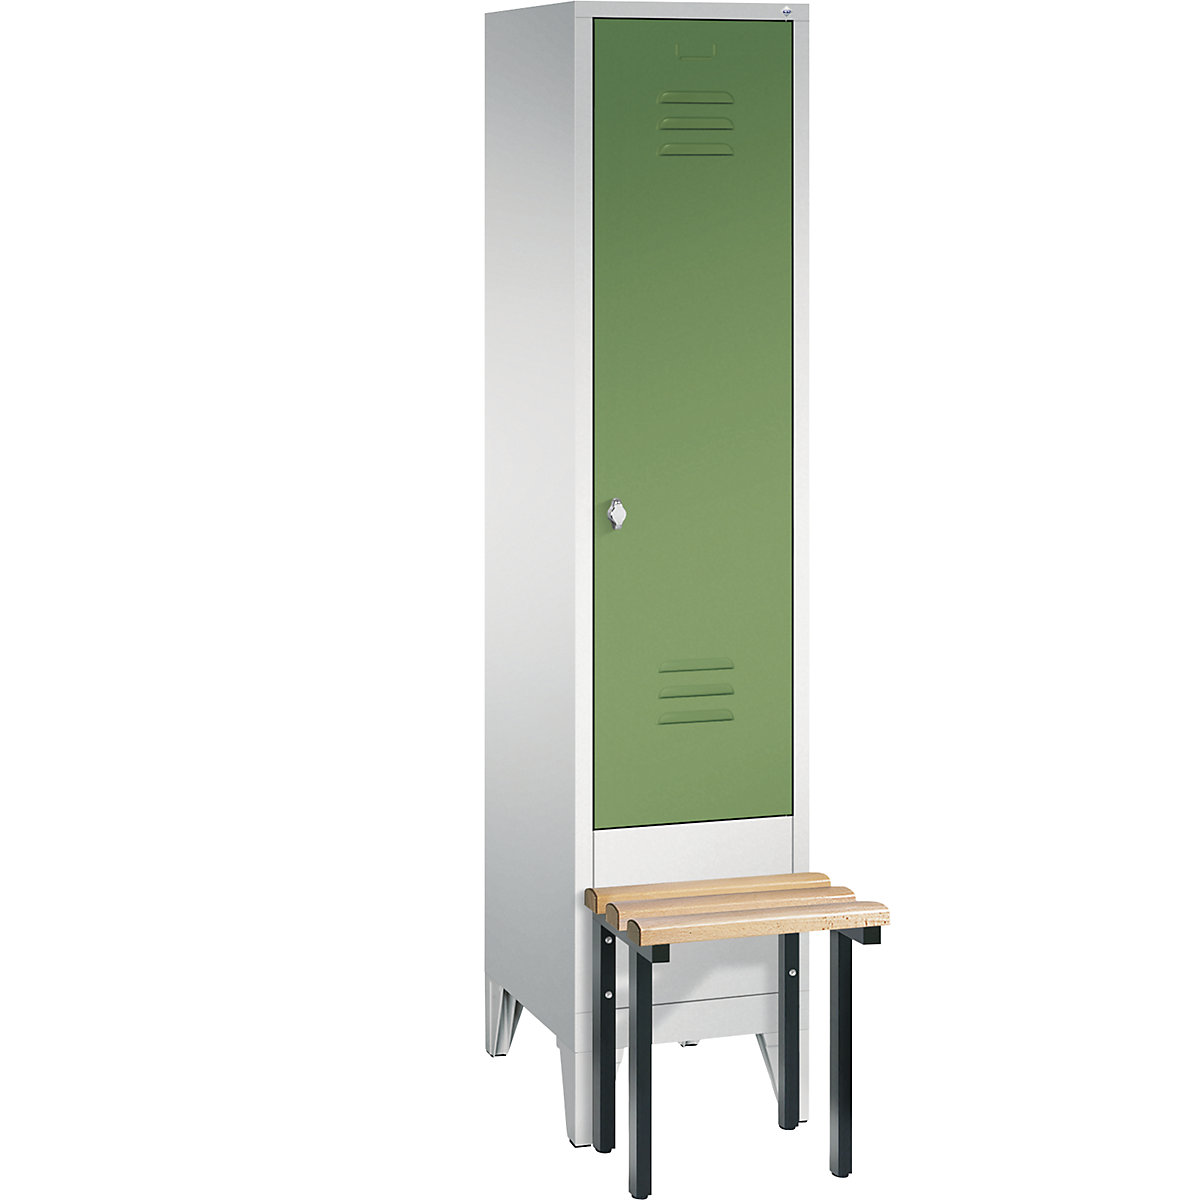 CLASSIC cloakroom locker with bench mounted in front – C+P, 1 compartment, compartment width 400 mm, light grey / reseda green-10